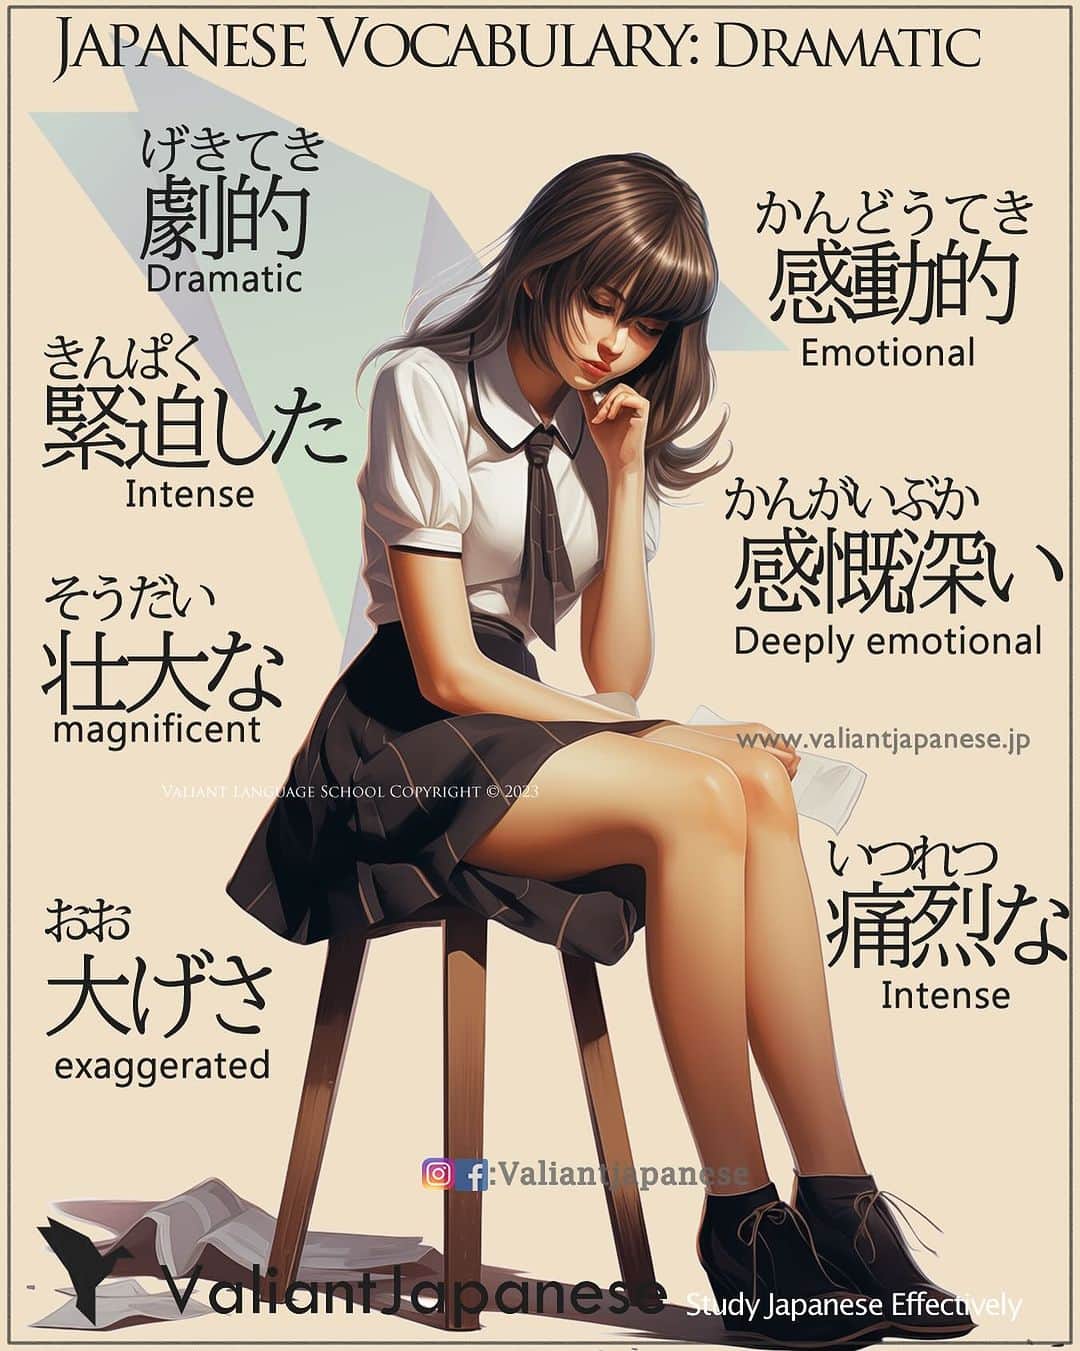 Valiant Language Schoolさんのインスタグラム写真 - (Valiant Language SchoolInstagram)「👩‍🏫:New Beginner Classes Starting November 11th, DM us for info  Simple Japanese : Dramatic 😮‍💨 . Use code : MOMIJI To get 10% off on our shop .  Example Sentences below 👇 劇的 (Gekiteki) - Meaning: "dramatic" or "drastic"  彼の回復は劇的でした。 (Kare no kaifuku wa gekiteki deshita.) Translation: His recovery was dramatic. 感動的 (Kandouteki) - Meaning: "emotional" or "moving"  映画の結末は感動的でした。 (Eiga no ketsumatsu wa kandouteki deshita.) Translation: The ending of the movie was emotional. 舞台的 (Butaiteki) - Meaning: "theatrical" or "stage-like"  そのパフォーマンスは舞台的な演出がされていました。 (Sono pafoomansu wa butaiteki na enshutsu ga sareteimashita.) Translation: The performance had a theatrical staging. 大げさ (Oogesa) - Meaning: "exaggerated" or "over-the-top"  彼女の反応はいつも大げさですね。 (Kanojo no hankou wa itsumo oogesa desu ne.) Translation: Her reactions are always exaggerated. 緊迫した (Kinpaku shita) - Meaning: "tense" or "intense"  その場面は緊迫した雰囲気に包まれていました。 (Sono bamen wa kinpaku shita fun'iki ni tsutsumareteimashita.) Translation: The scene was surrounded by a tense atmosphere. 感慨深い (Kangai bukai) - Meaning: "deeply moving" or "emotionally touching"  あの瞬間は感慨深いものでした。 (Ano shunkan wa kangai bukai mono deshita.) Translation: That moment was deeply moving.  壮大な (Soudai na) - Meaning: "grand" or "magnificent"  その壮大な風景に圧倒されました。 (Sono soudai na fuukei ni attousaremashita.) Translation: I was overwhelmed by the grand landscape. 痛烈な (Itsuretsu na) - Meaning: "intense" or "strong"  彼の批評は痛烈でしたが、正確でした。 (Kare no hihyou wa itsuretsu deshita ga, seikaku deshita.) Translation: His criticism was intense but accurate.  #tshirts  #shinjuku  #新宿 #東京 #tokyo」11月9日 20時23分 - valiantjapanese